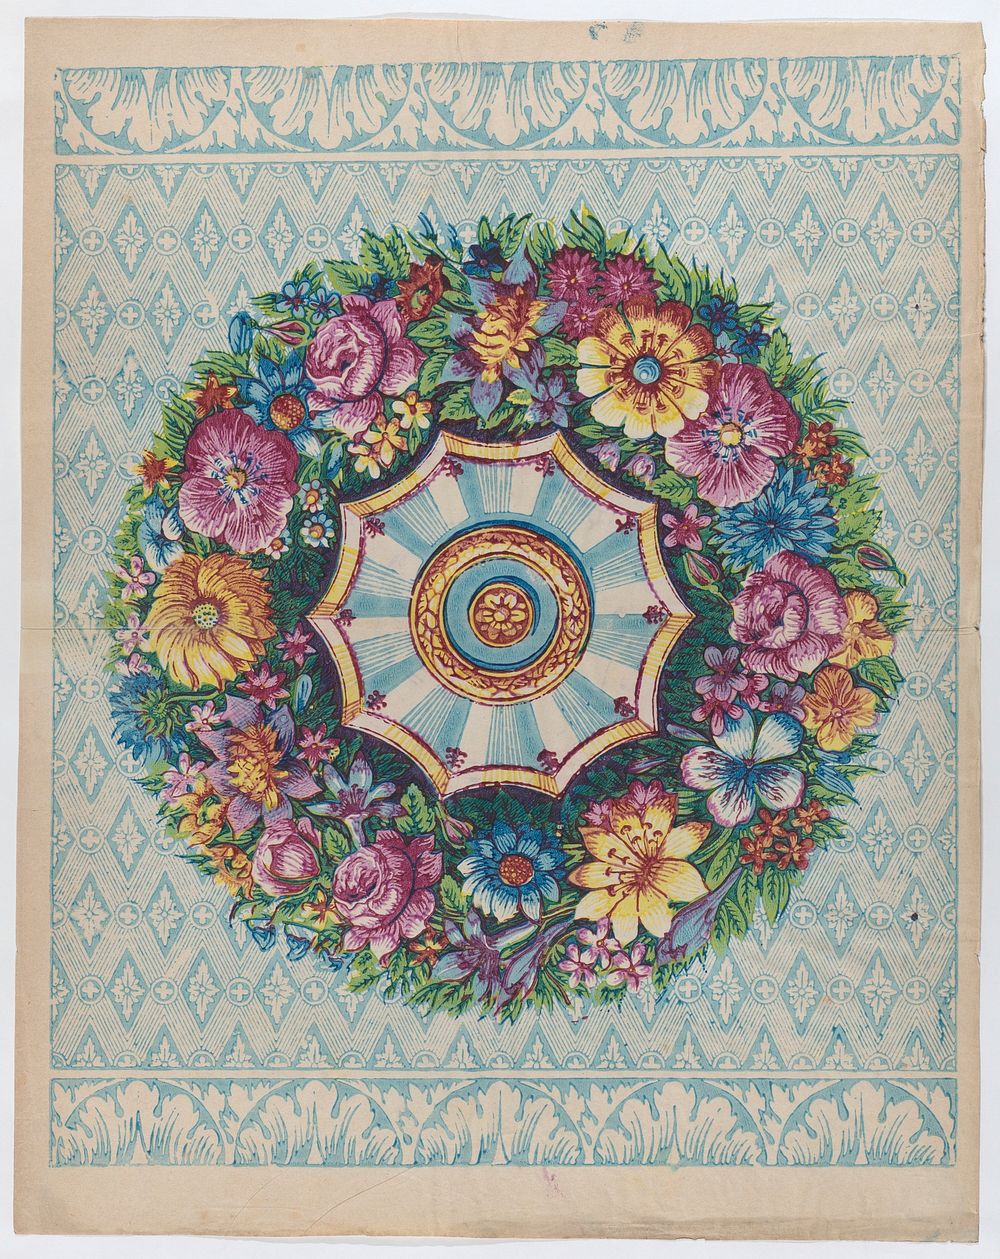 Sheet with a large floral wreath